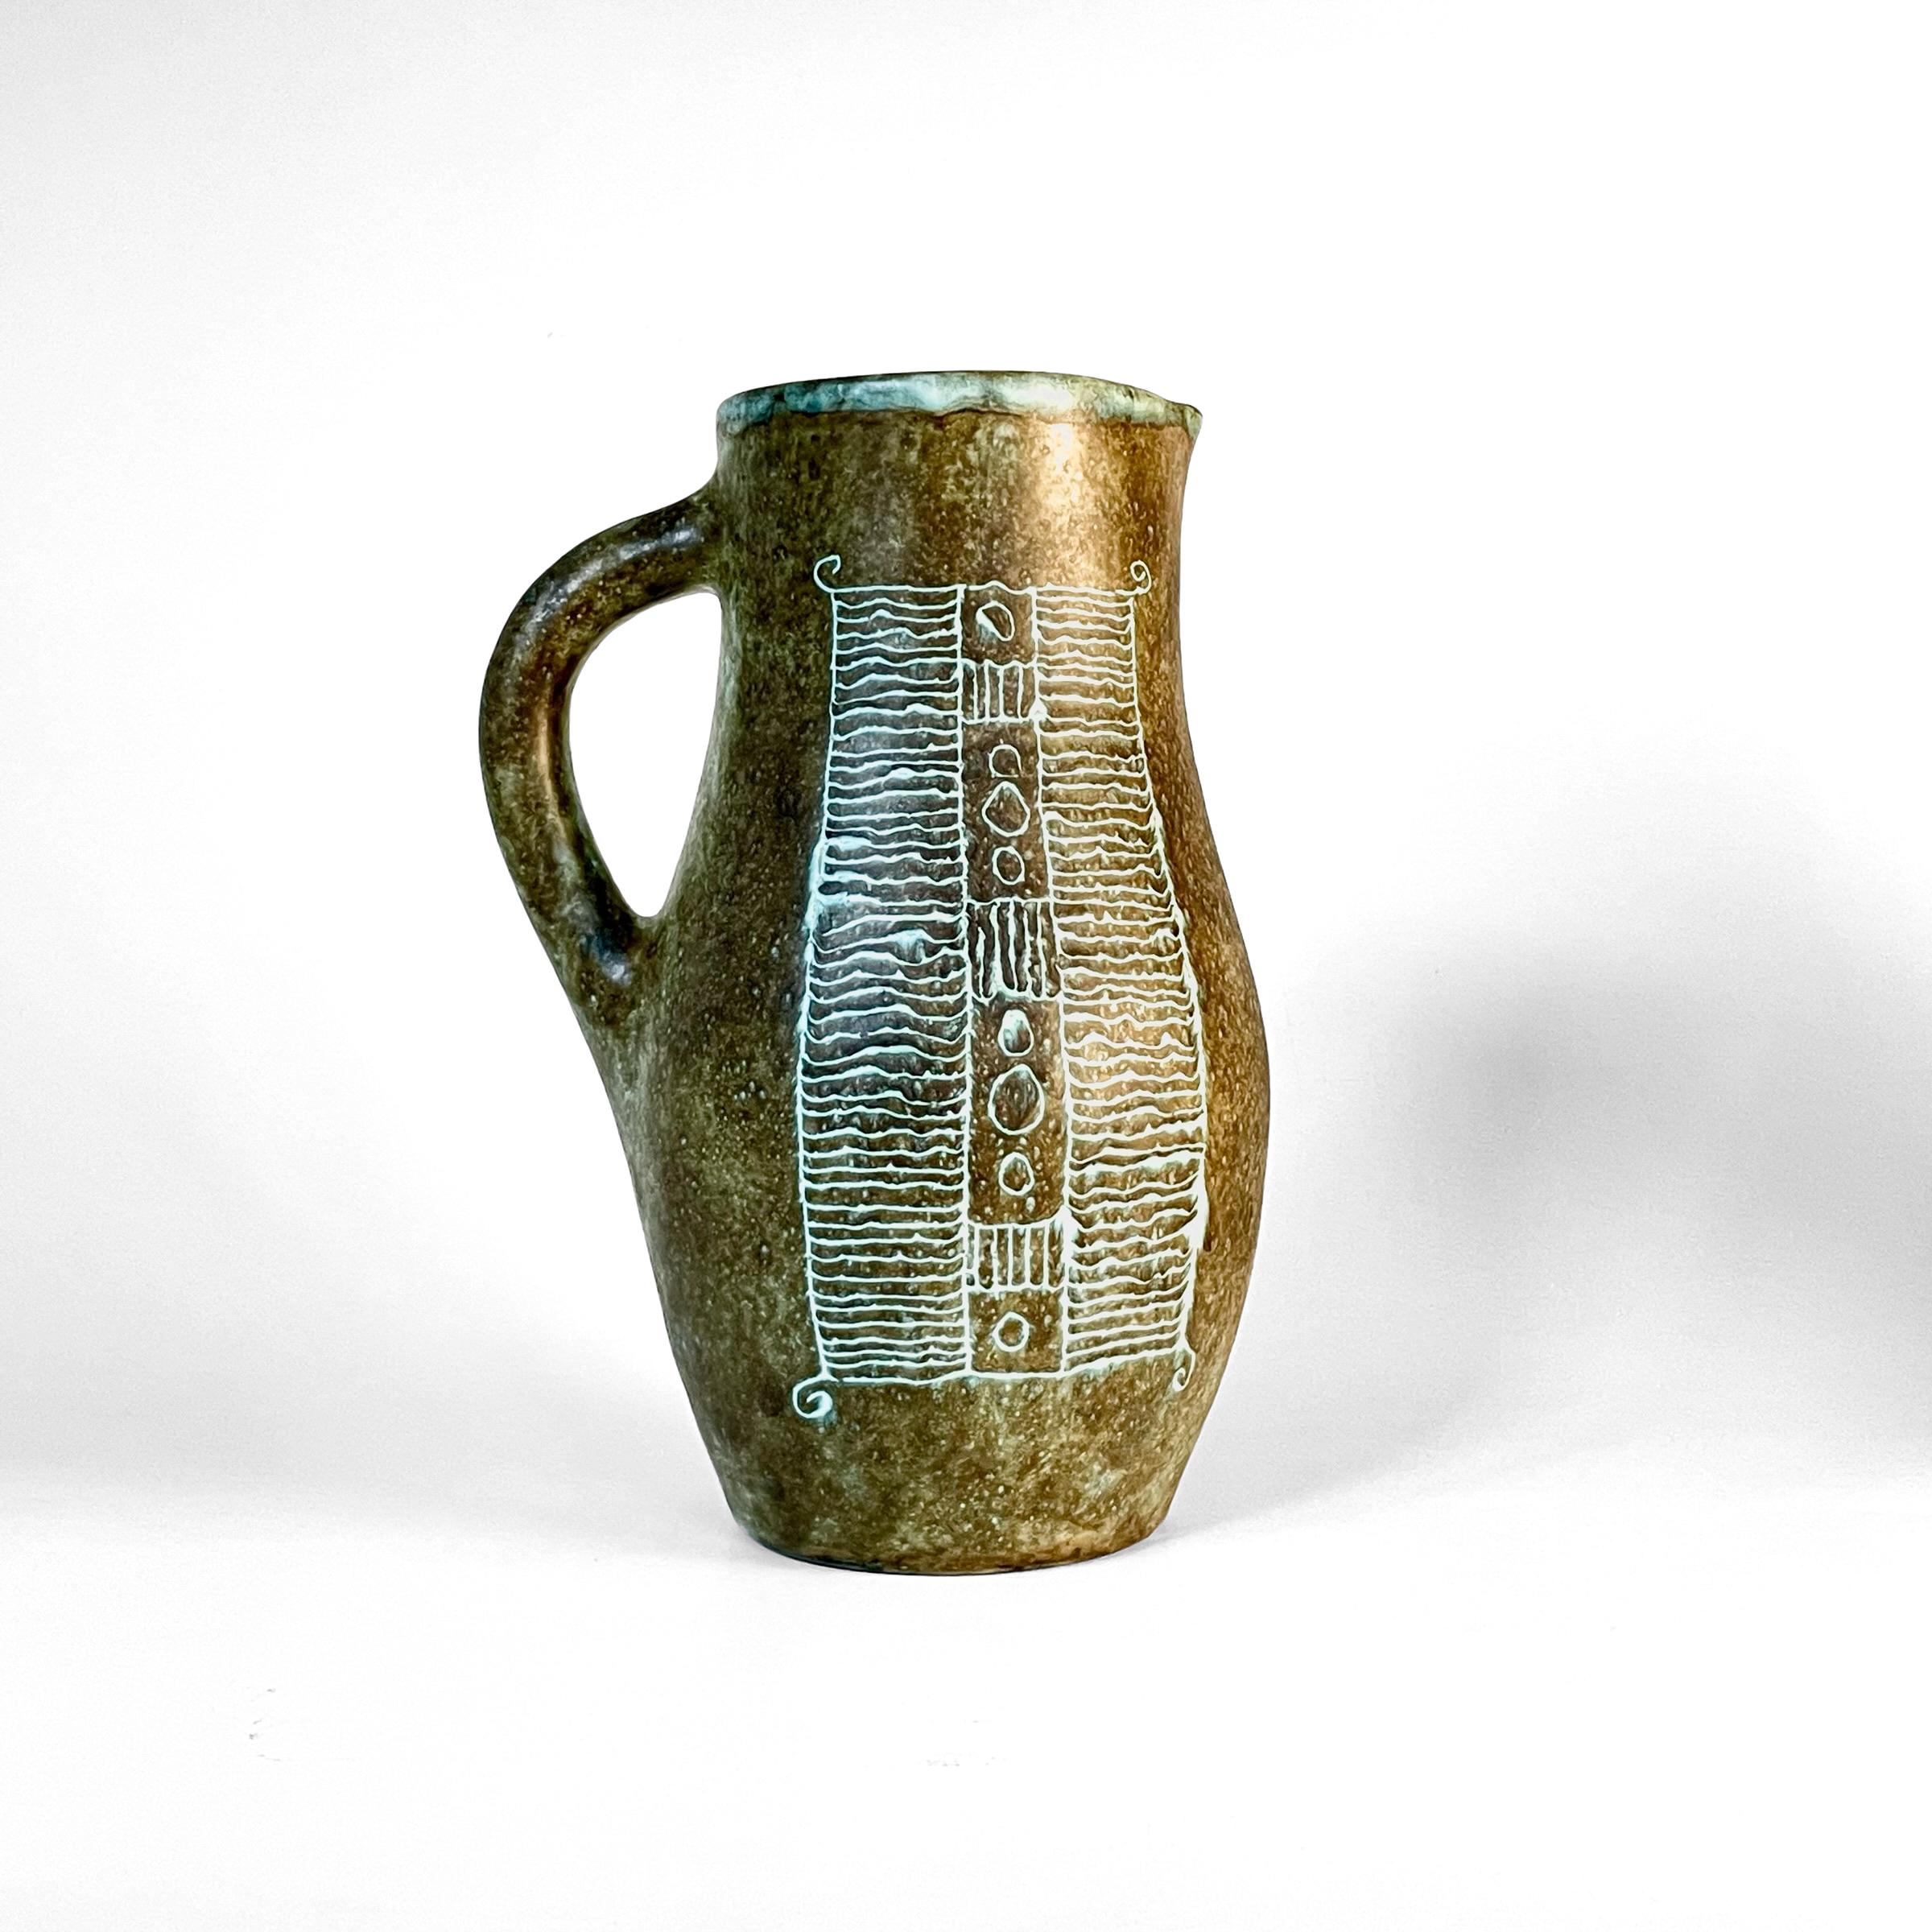 Mid-20th Century Ceramic pitcher by Jacques and Michelle Serre, Les 2 potiers, circa 1950